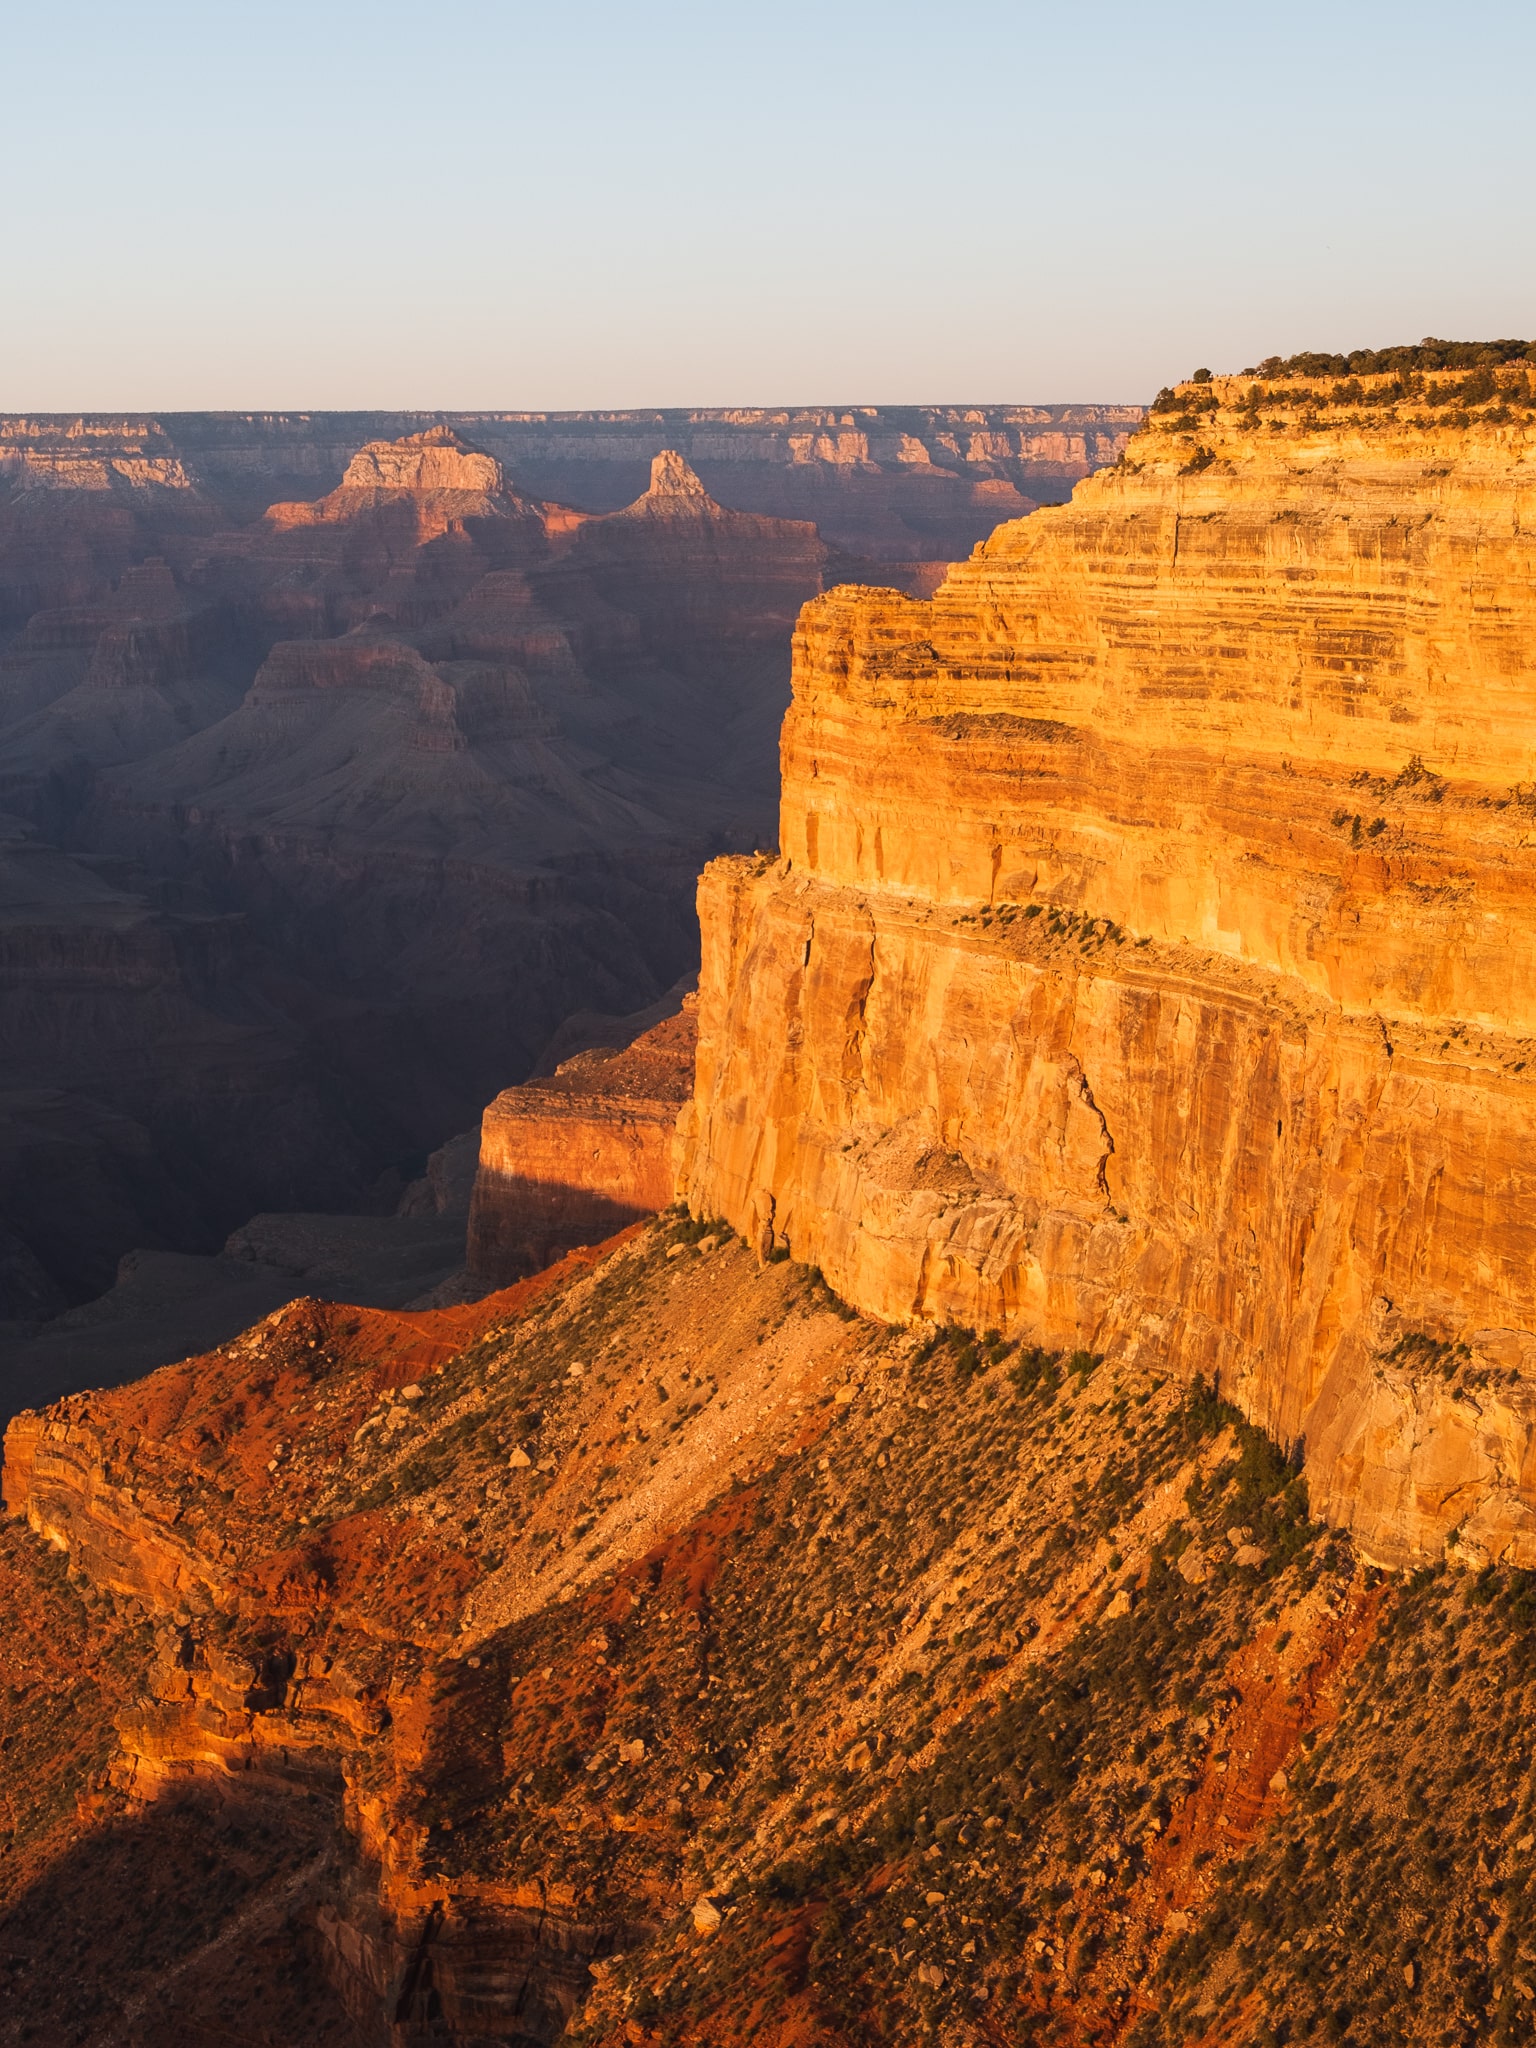 Mojave Point is one of the best places to watch the sunset in the Grand Canyon South Rim